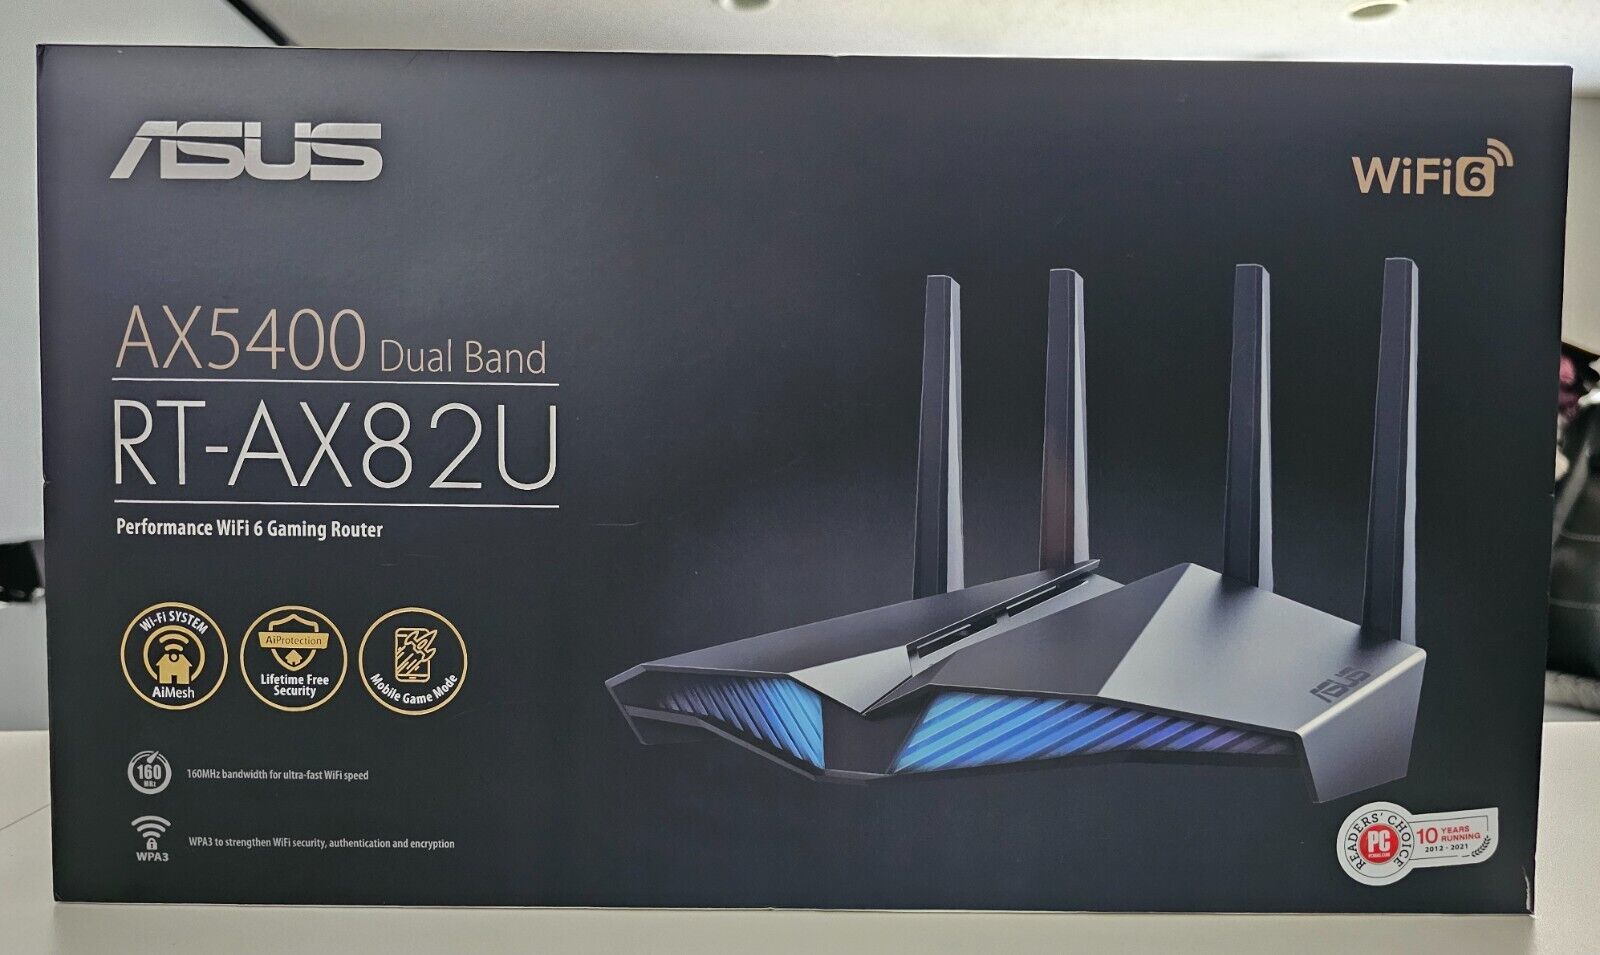 Lightly Used ASUS RT-AX82U AX5400 Dual-Band WiFi 6 Gaming Router - Complete Box